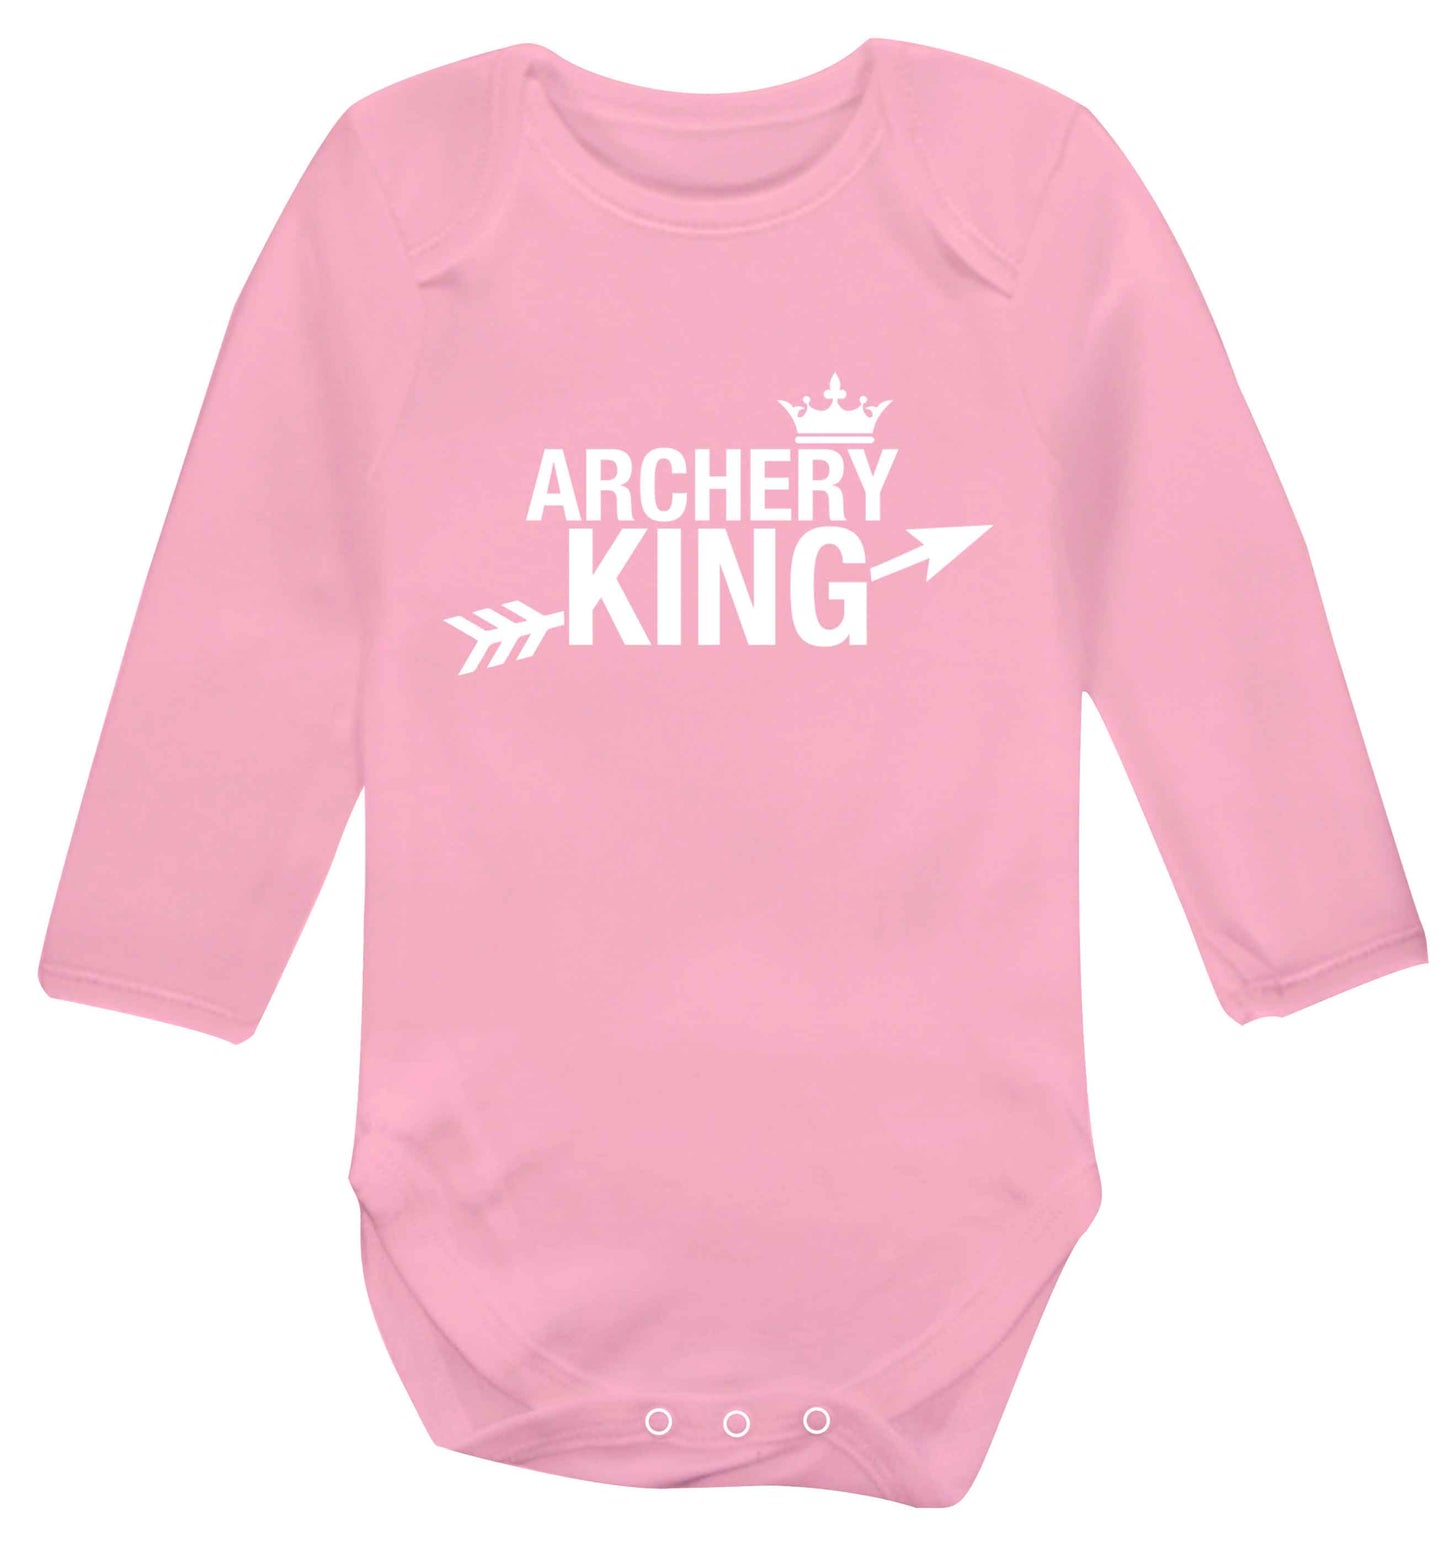 Archery king Baby Vest long sleeved pale pink 6-12 months